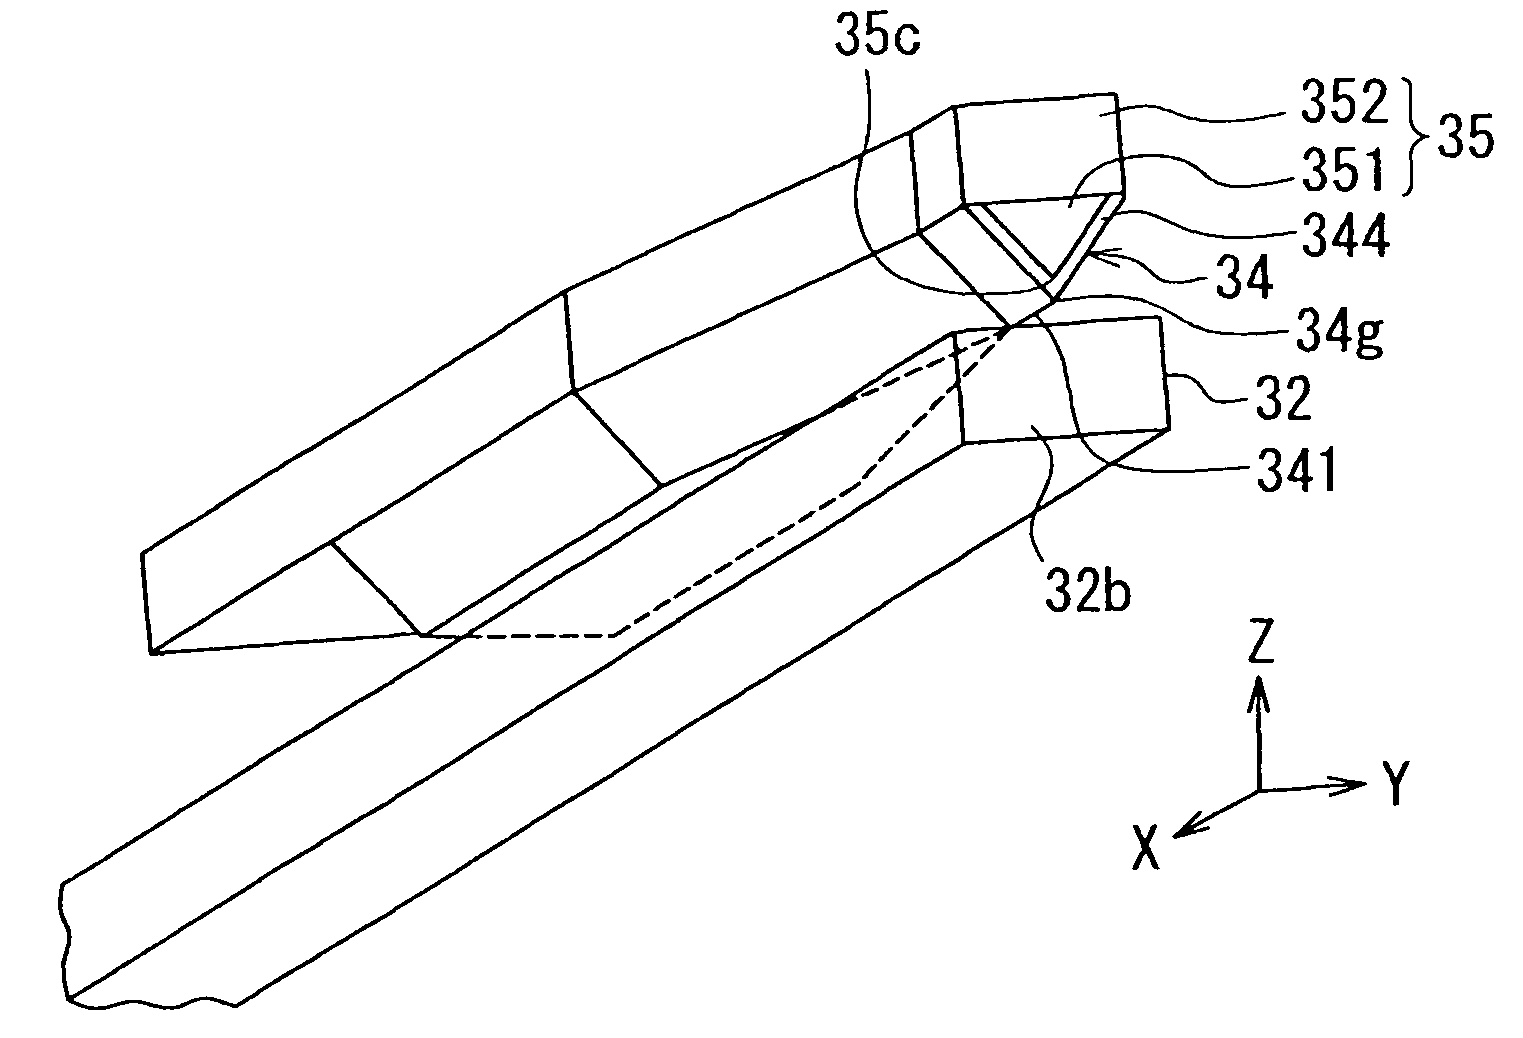 Thermally-assisted magnetic recording head including plasmon generator